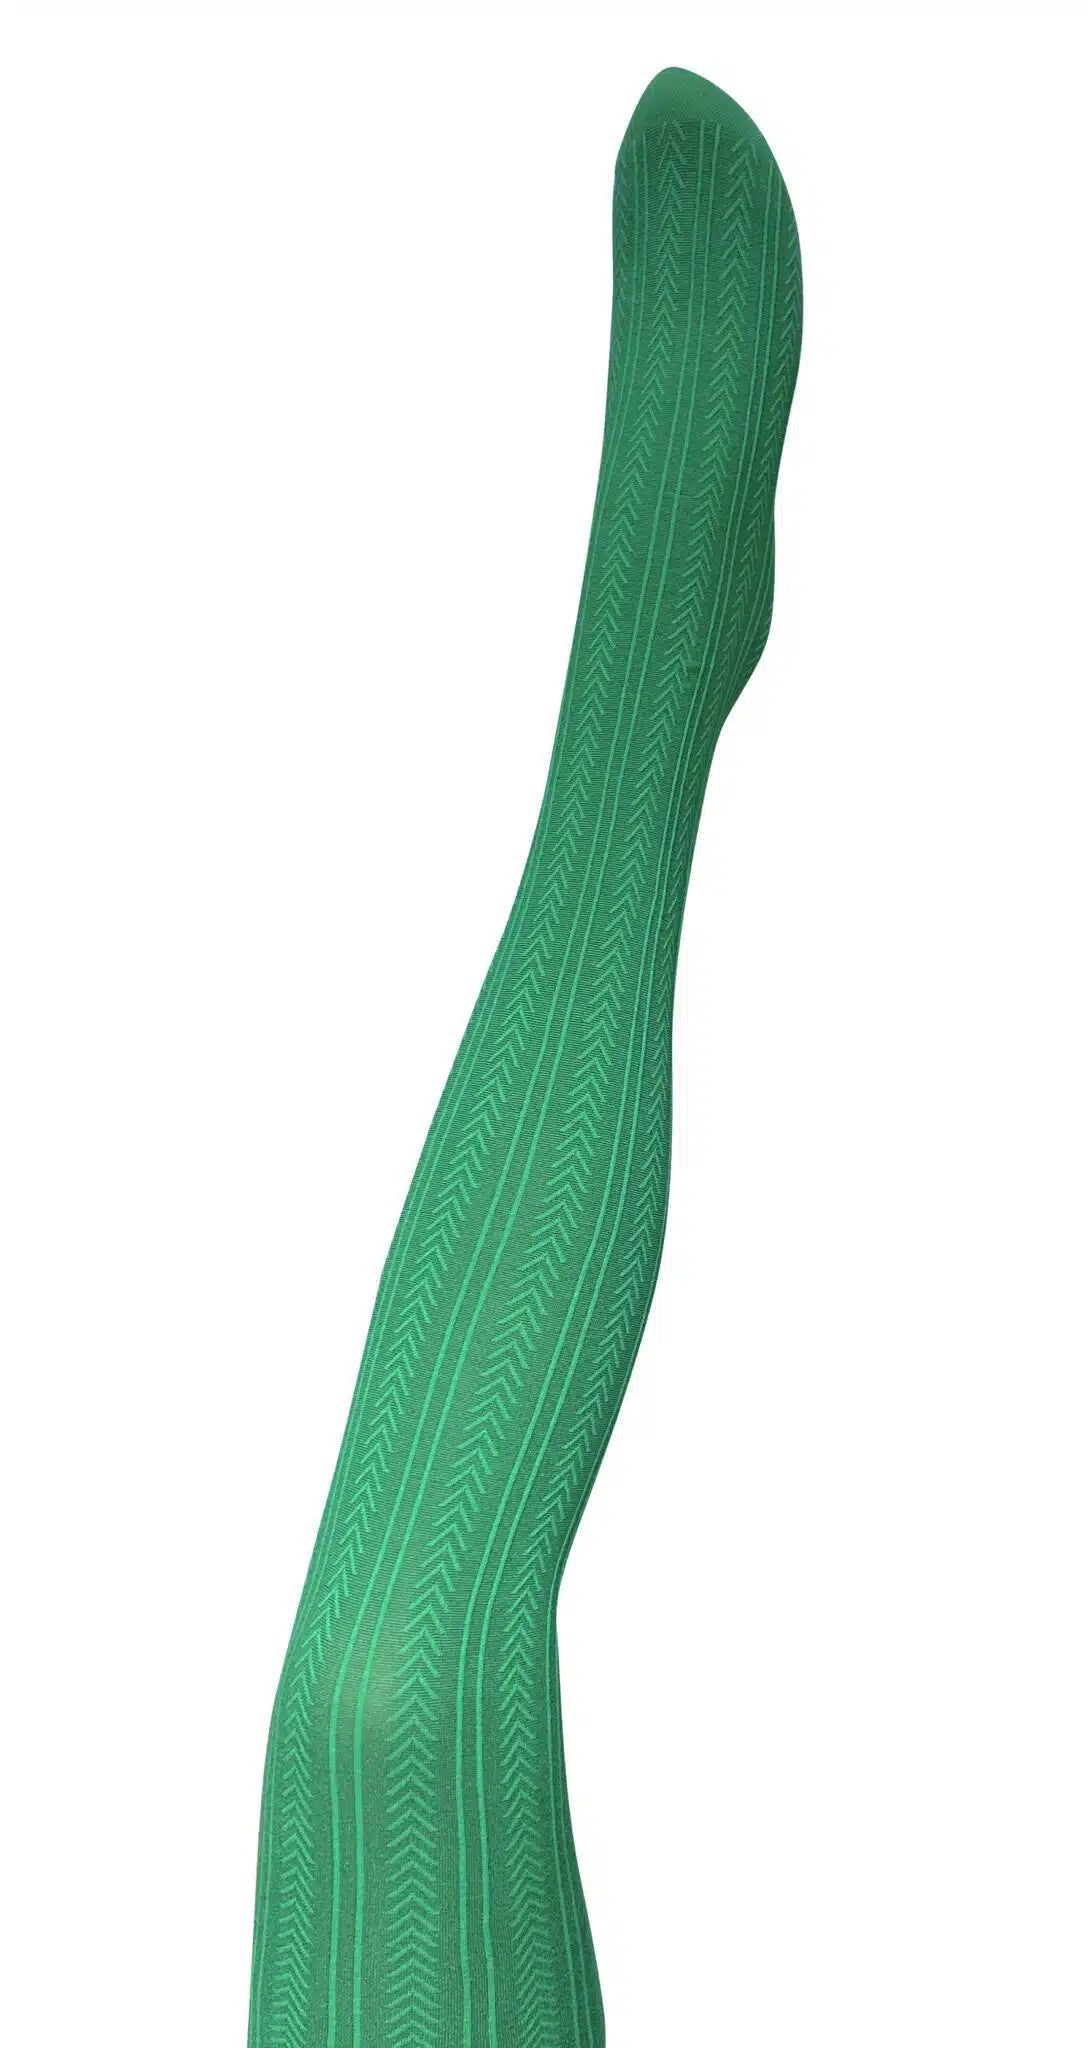 Tightology ‘Chic Green’ Cotton Tights